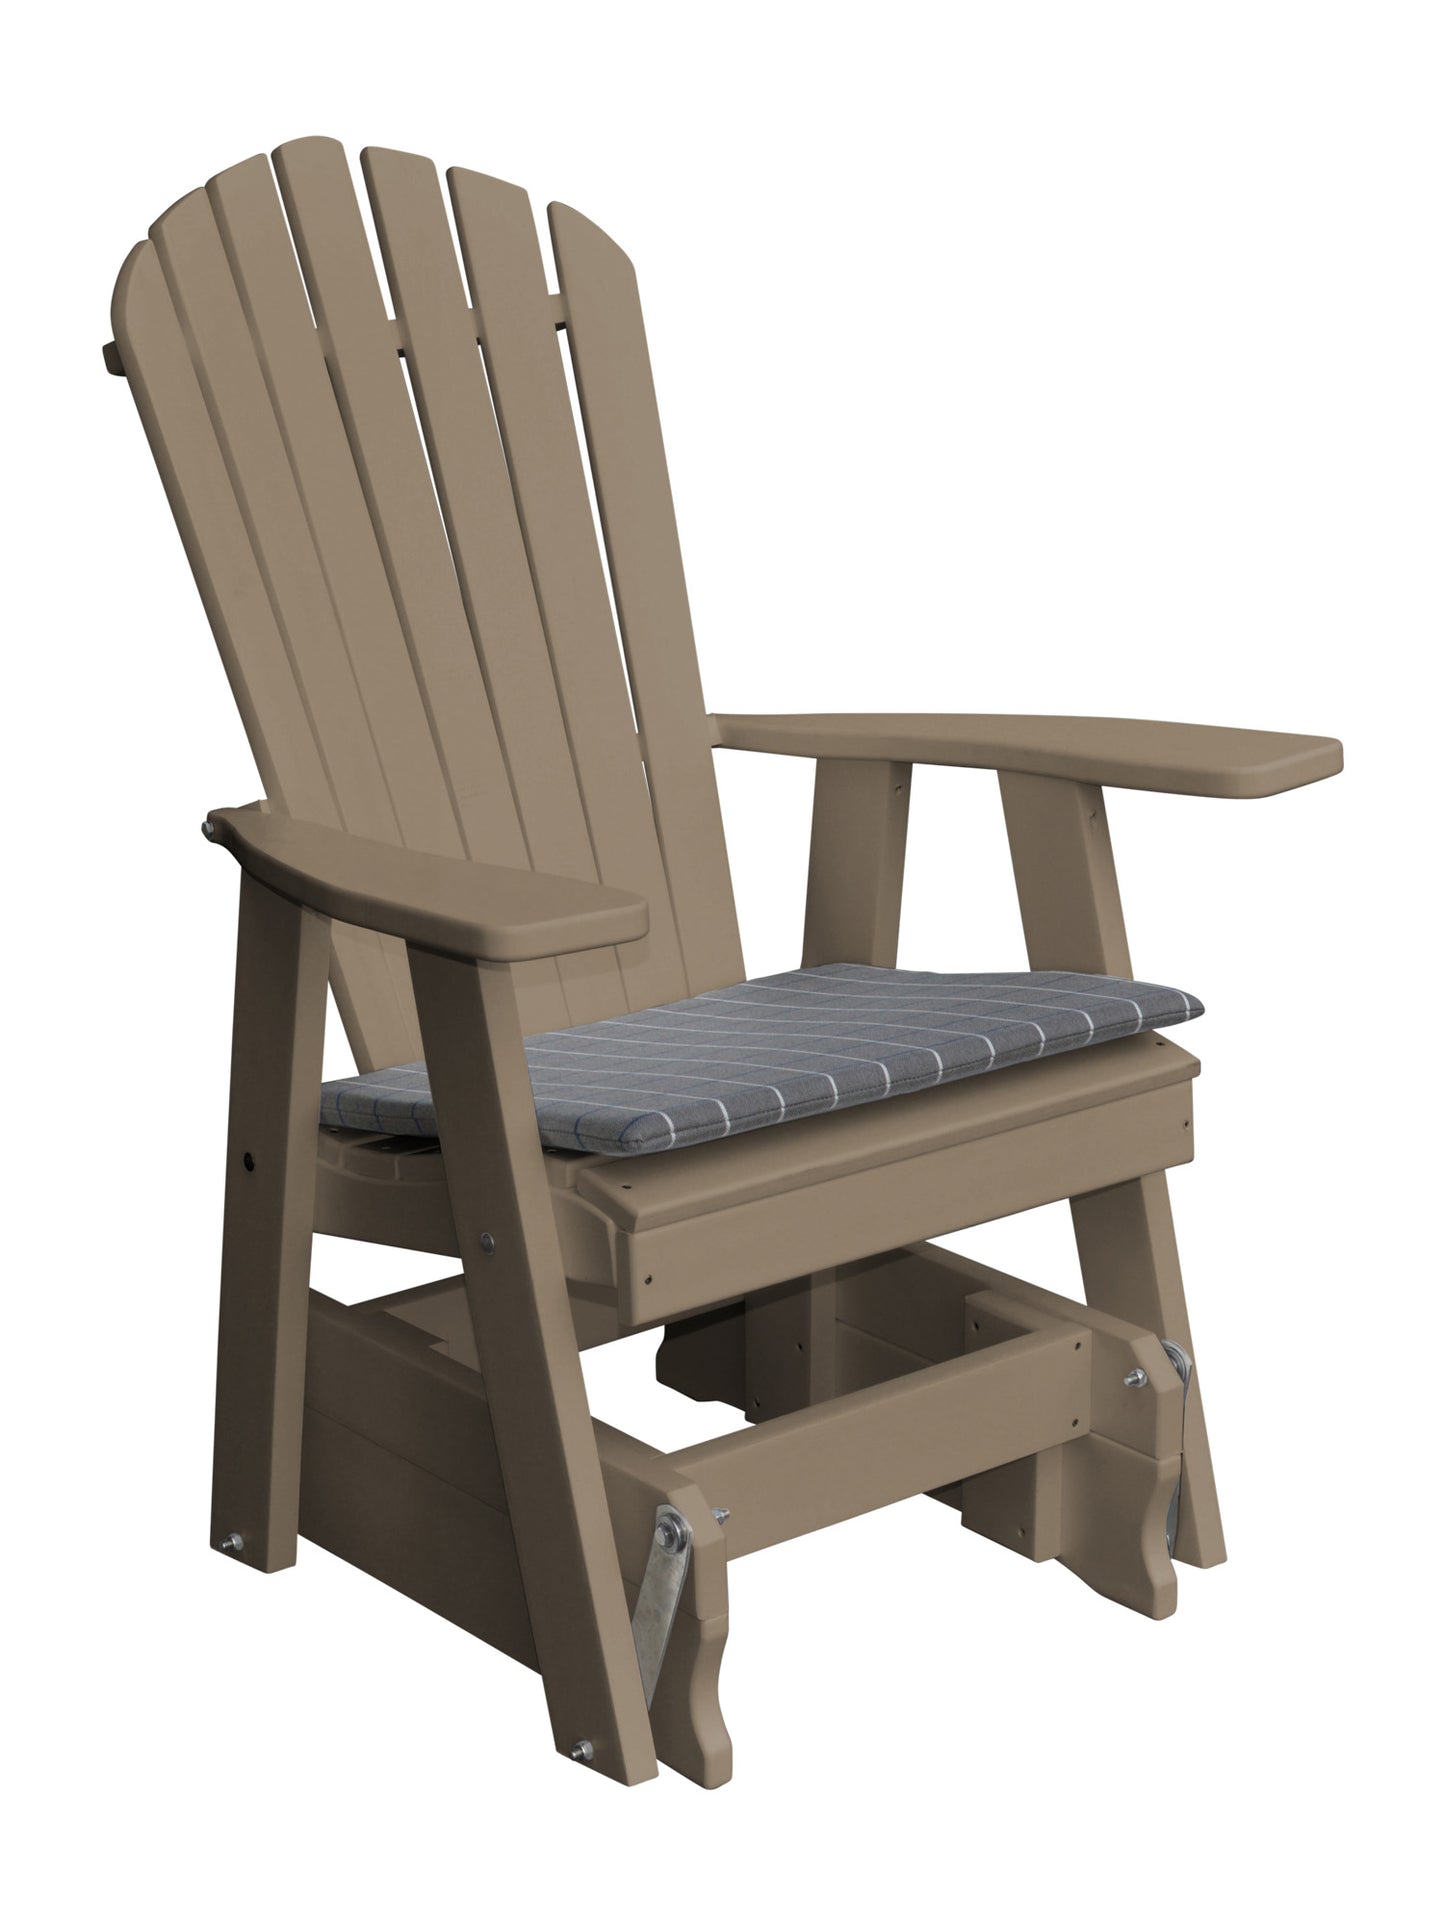 poly adirondack glider chair weathered wood with seat cushion